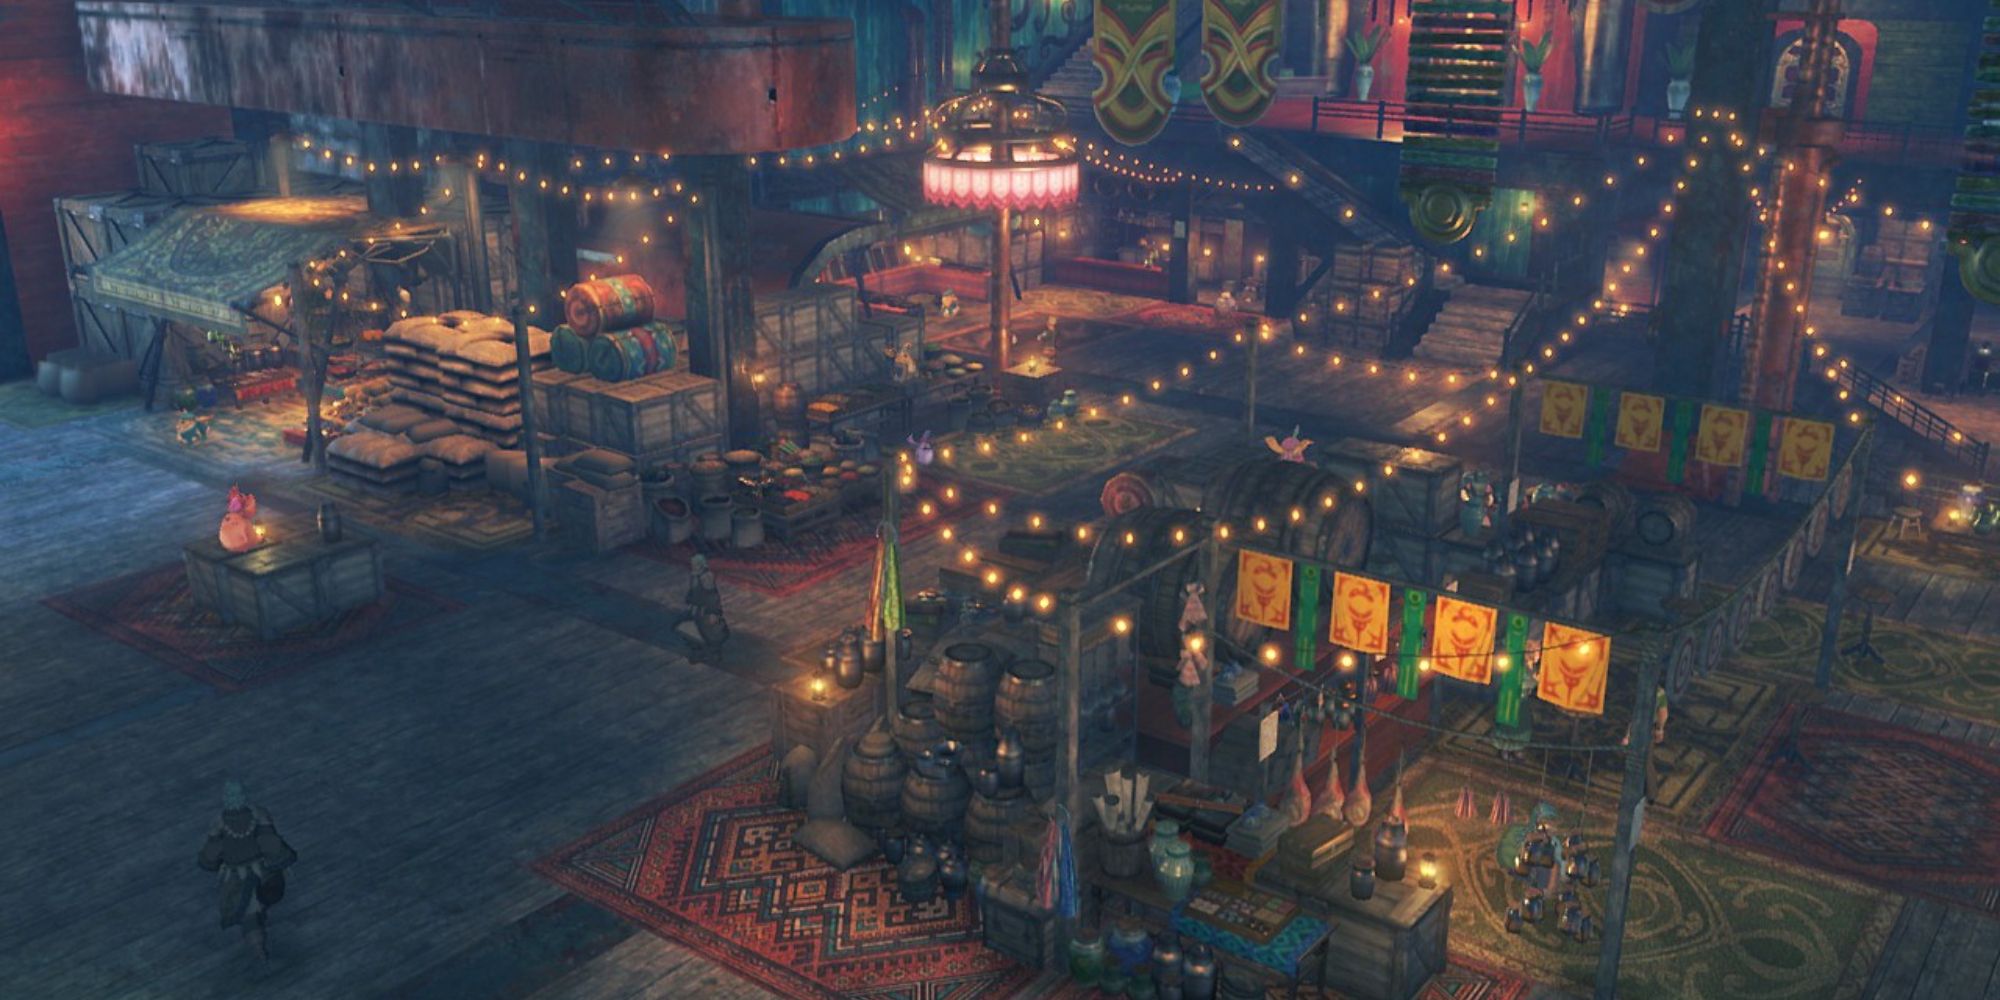 Xenoblade Chronicles 2 Locations a wide overhead shot of the various stalls, lights and people found in The Argentum Trade Guild